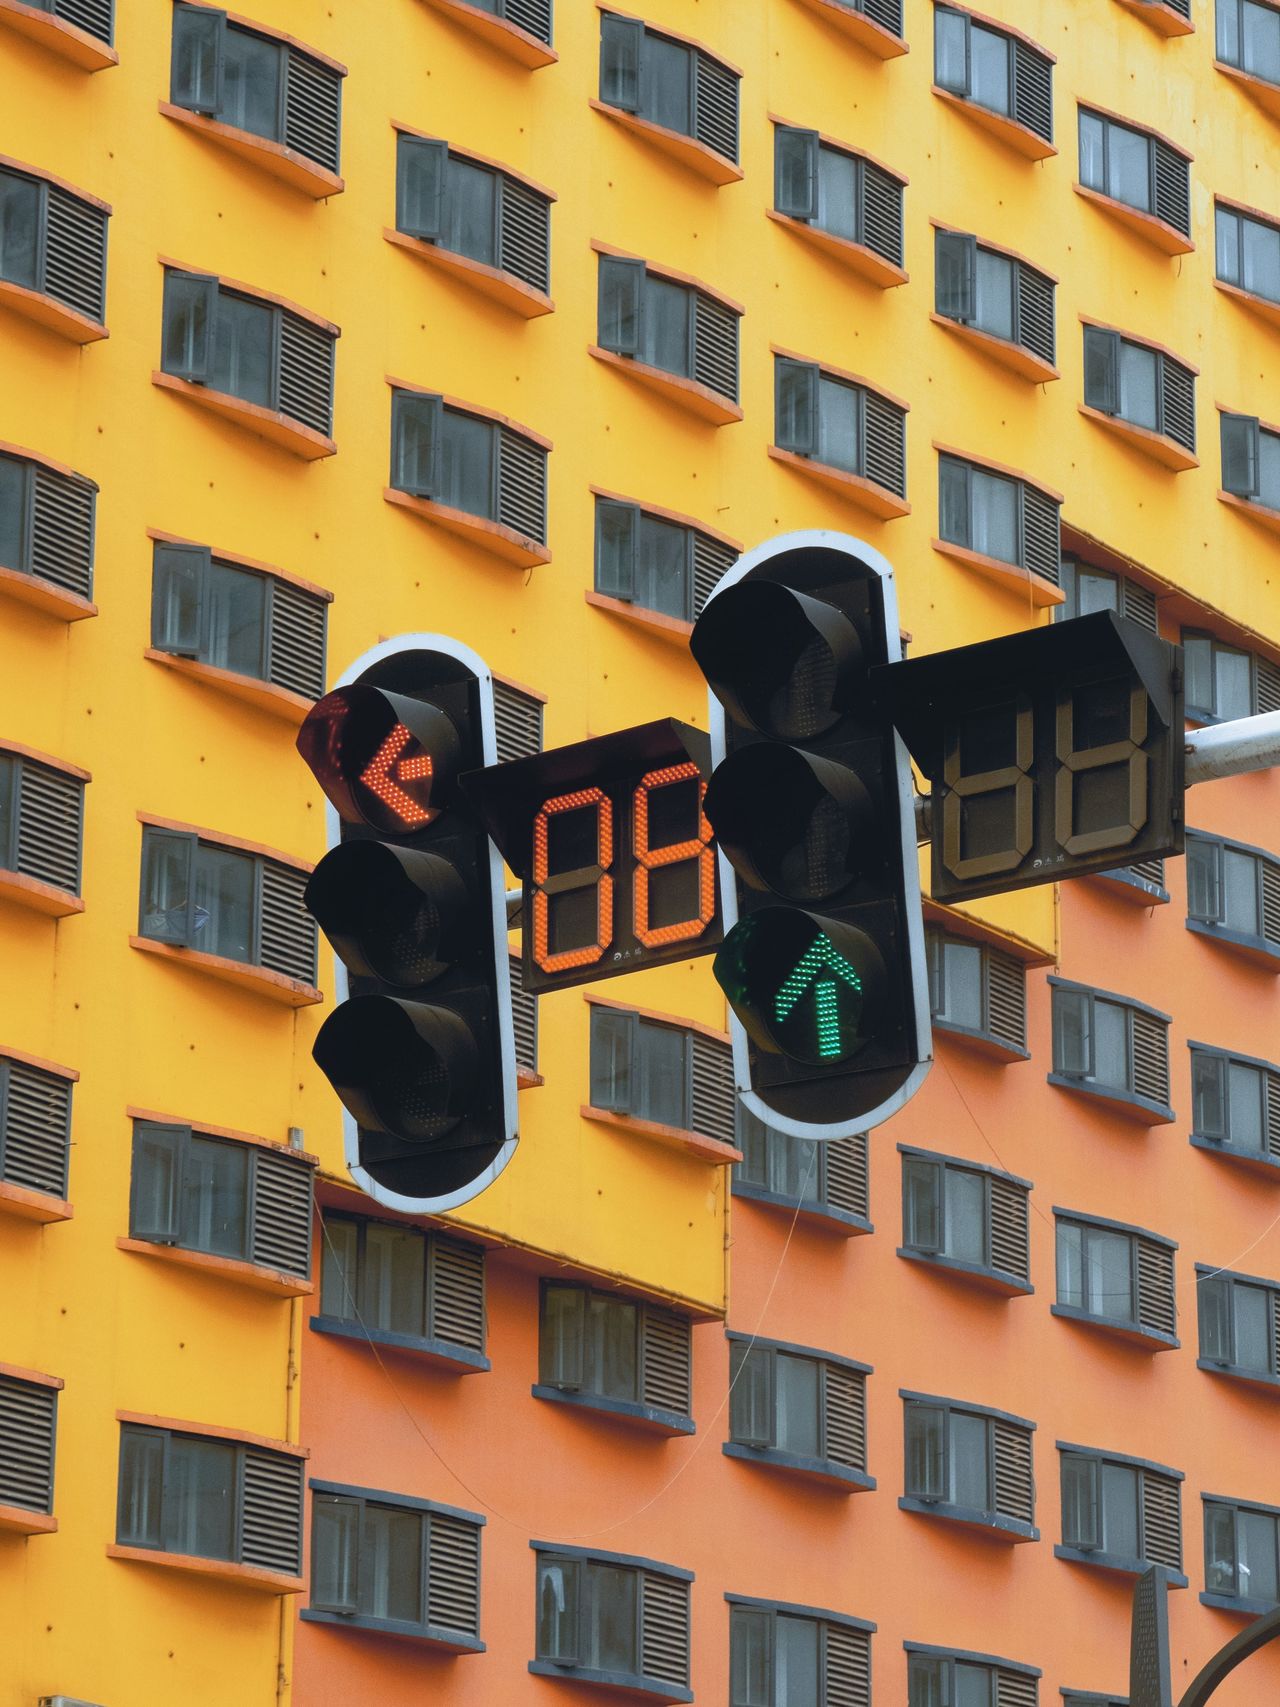 Picture of the traffic lights